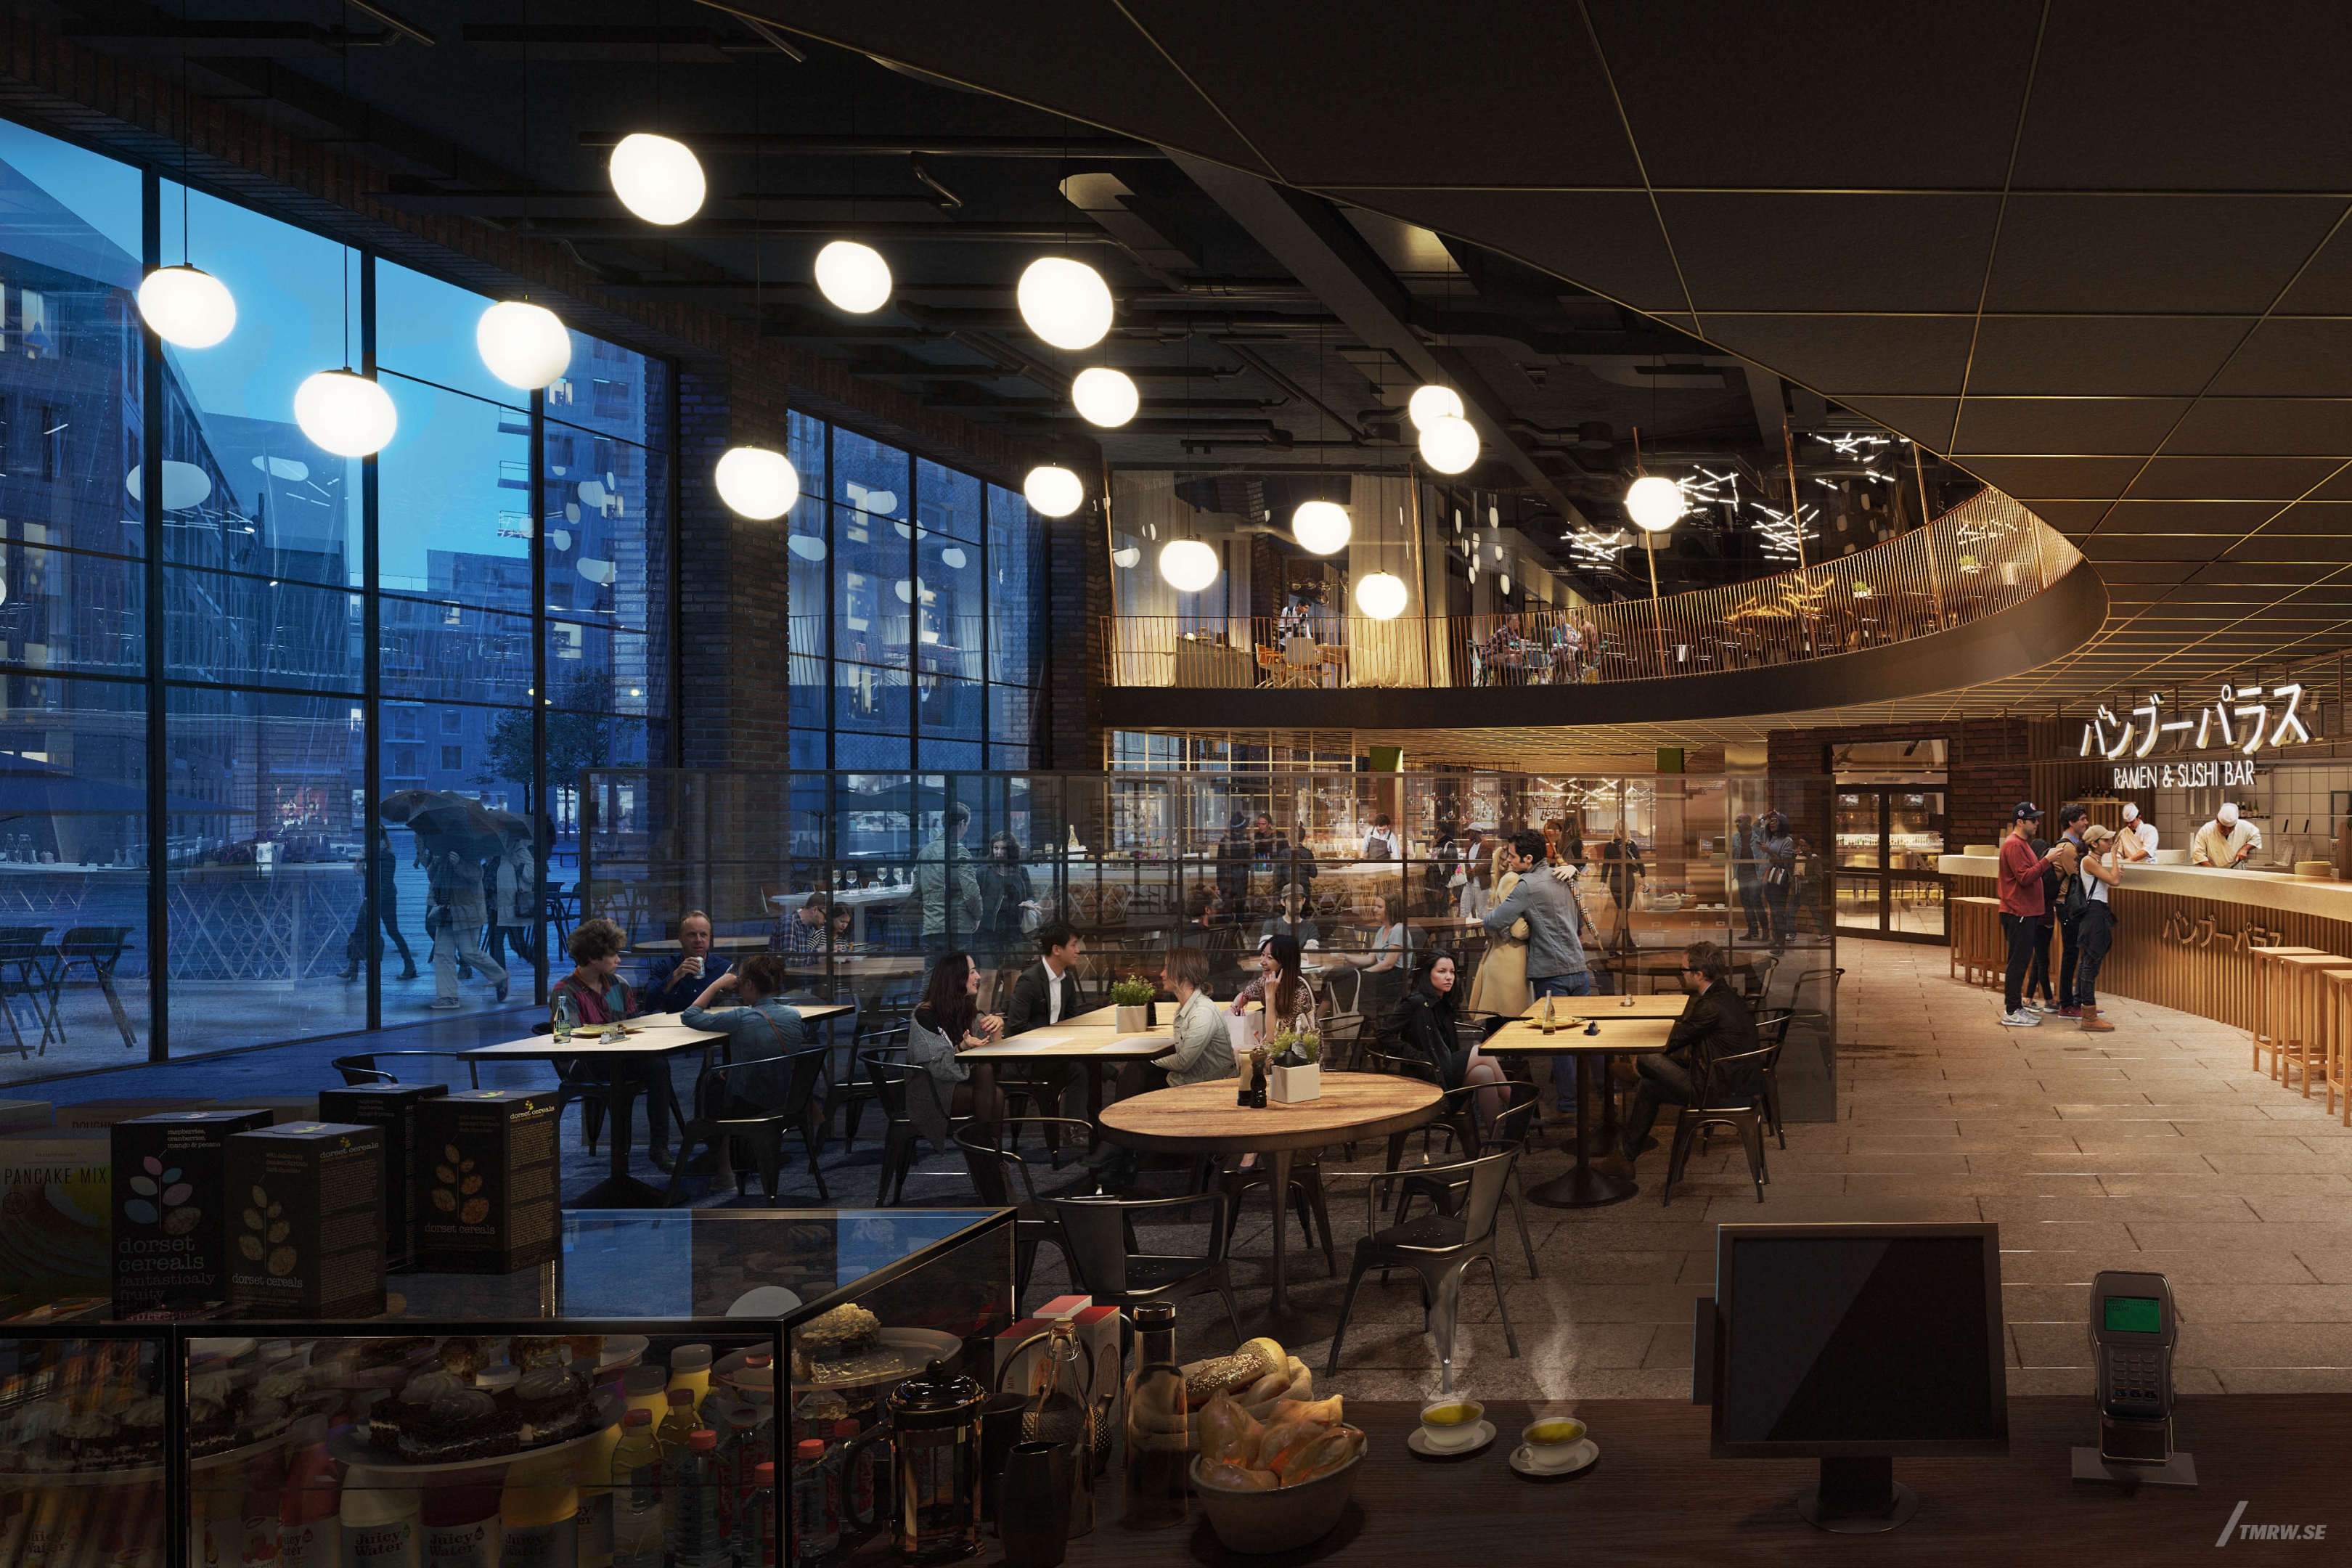 Architectural visualization of Varberg Hotel for Fredblads a restaurant area, with people sittning and socializing, in evening light form an interior view.